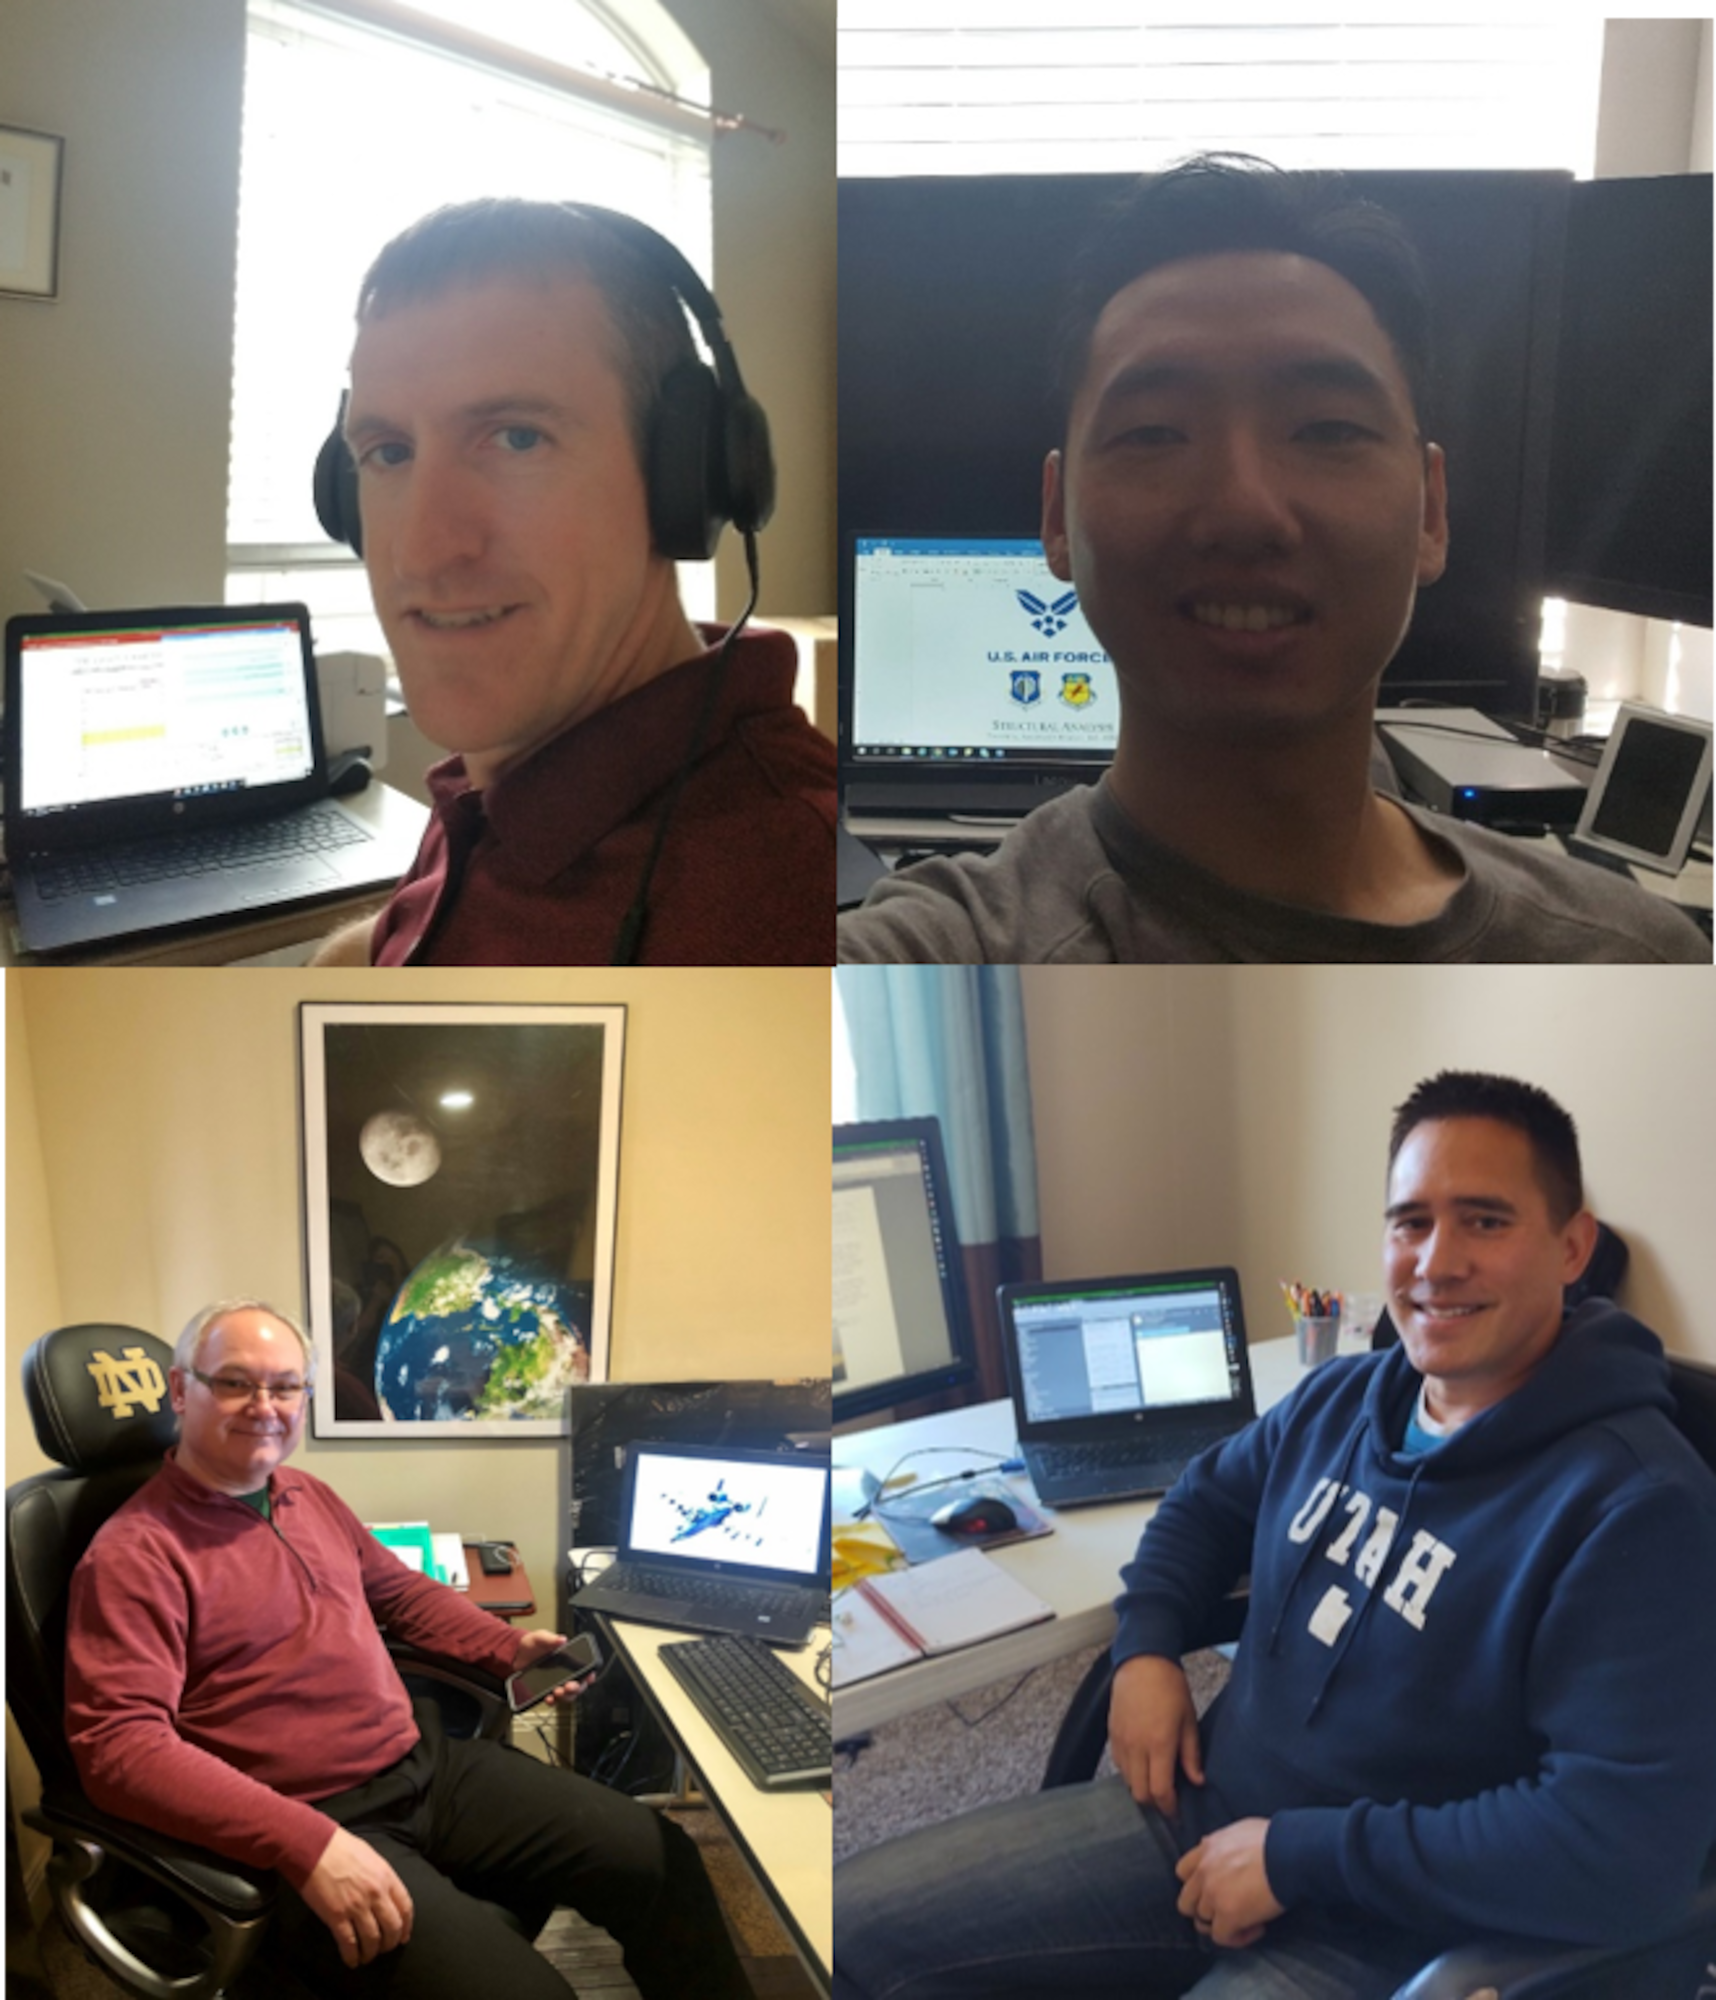 The A-10 Engineering Team met virtually to review data and discuss.  Pictured are (starting top left and moving cw) Reed Fawcett, 1st Lt. James Zhen, Greg Stowe and Michael Hackett, Jr.  (courtesy photo)